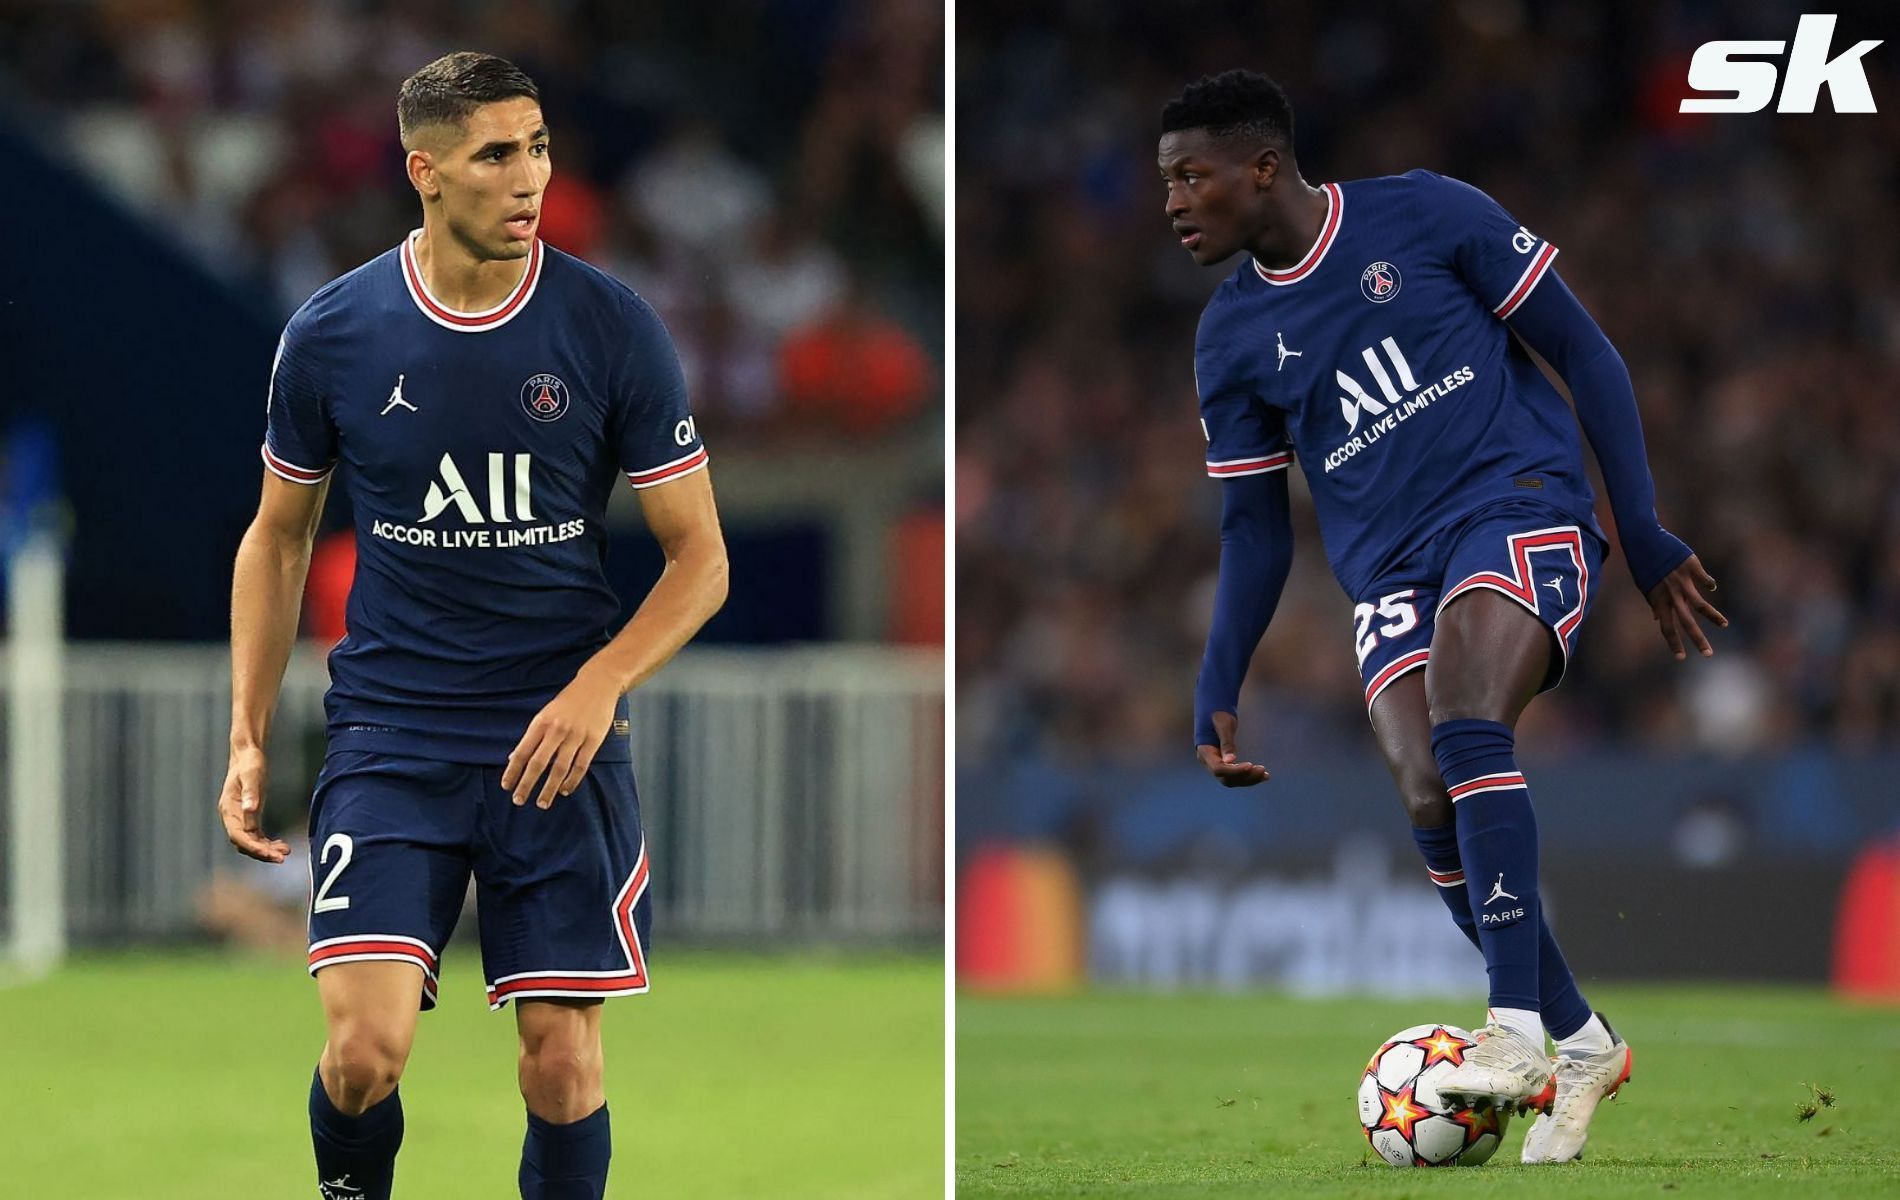 Nuno Mendes and Achraf Hakimi can cause trouble to opposition full-backs in the Champions League